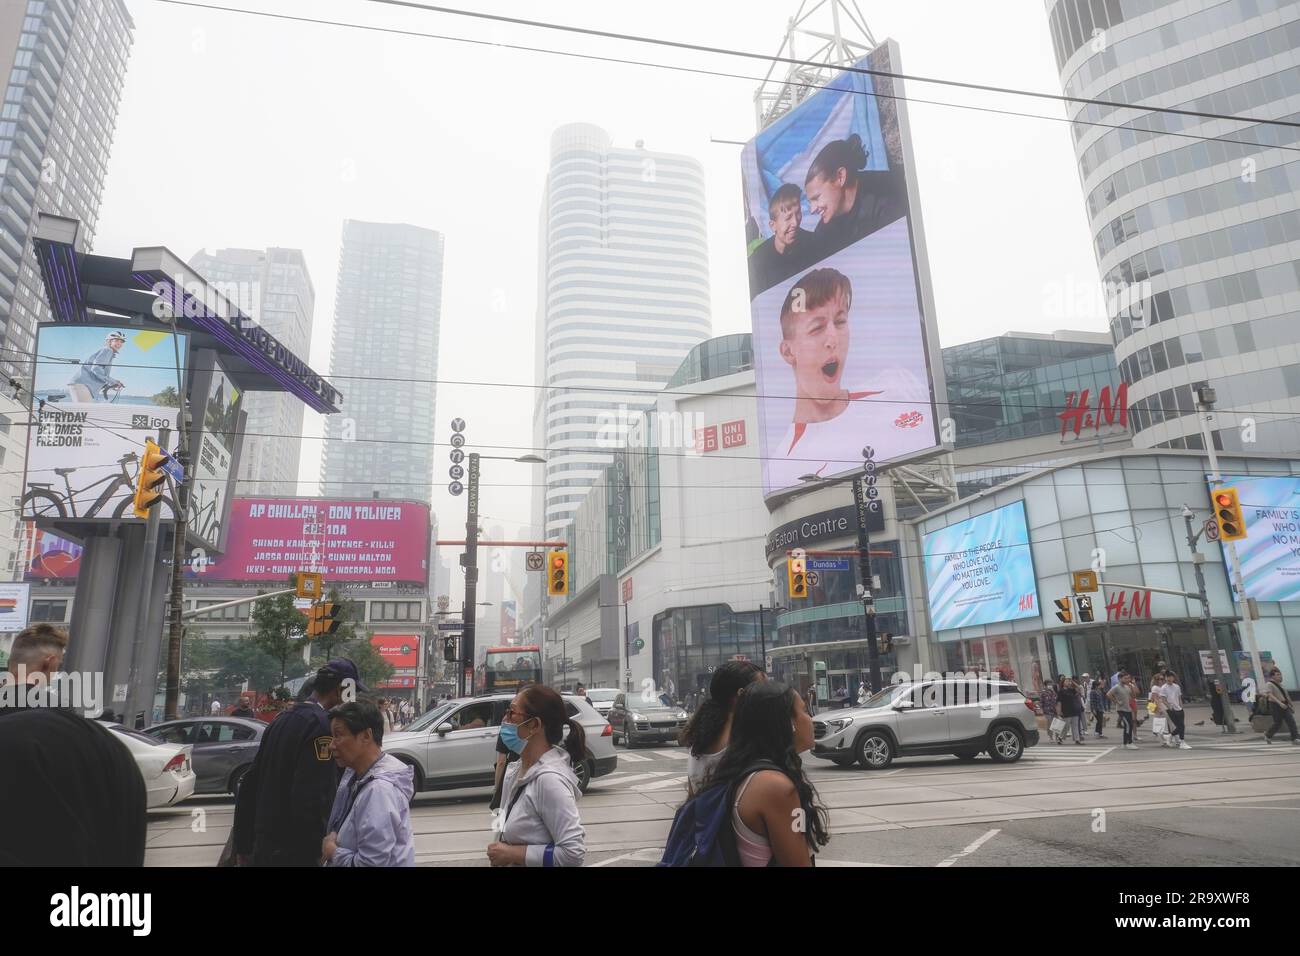 Toronto, Ontario/Canada - June 28, 2023: With very poor air quality index of PM 2.5 (over 200) and 10, due to forest fires in the north and west, Torontonians and cars are braving the healthy risks and going through busy downtown intersection of Yonge and Dundas. Some people are wearing masks. Toronto was considered a city among the worst air polluted on that day. For Editorial Uses Stock Photo